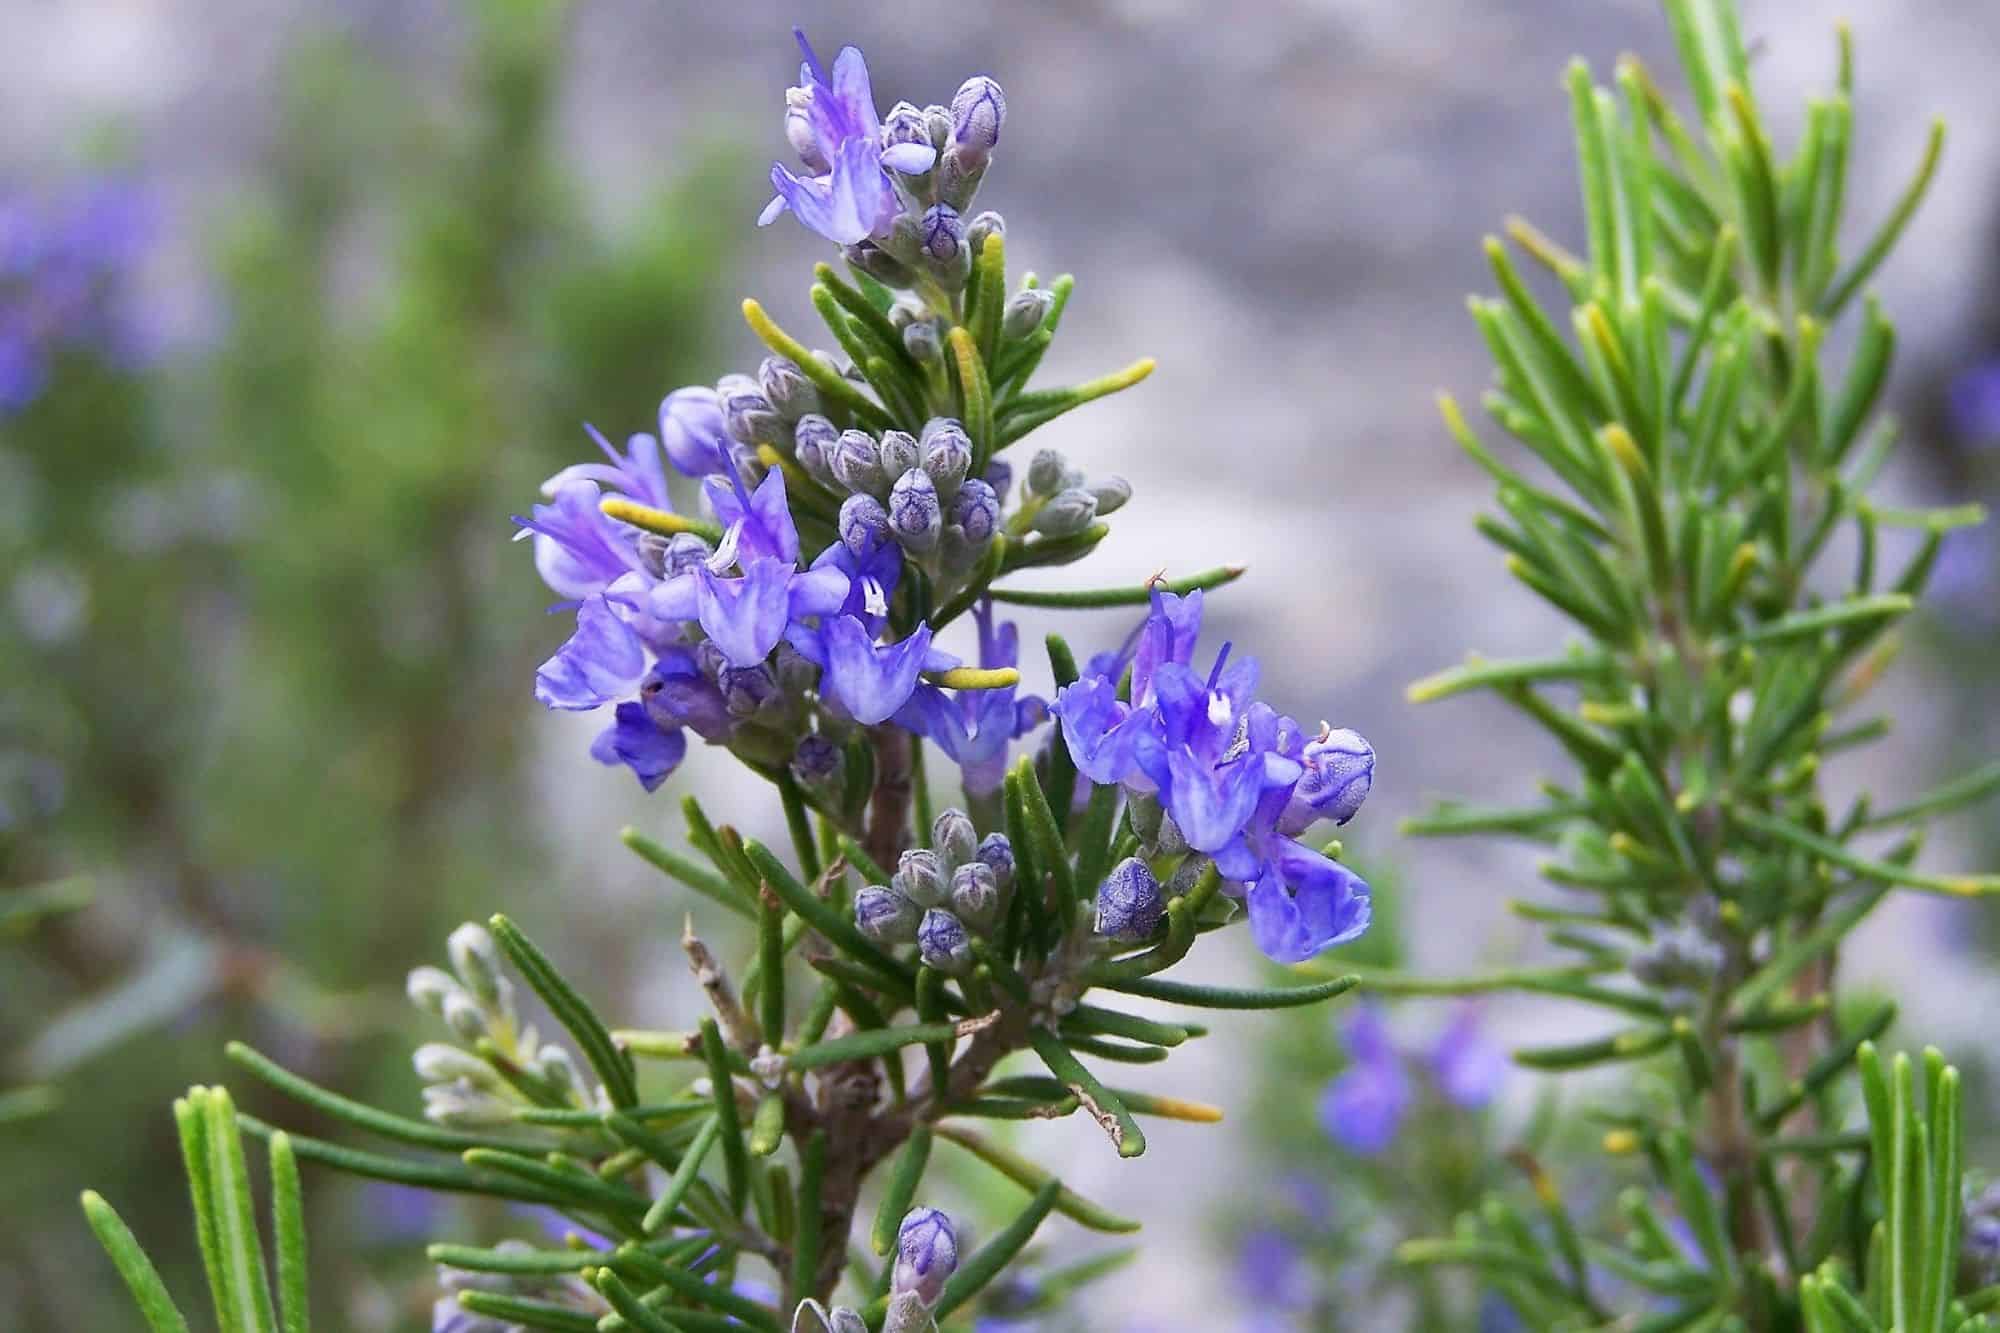 Rosemary with small purple flowers on it and a blurred out backdrop.